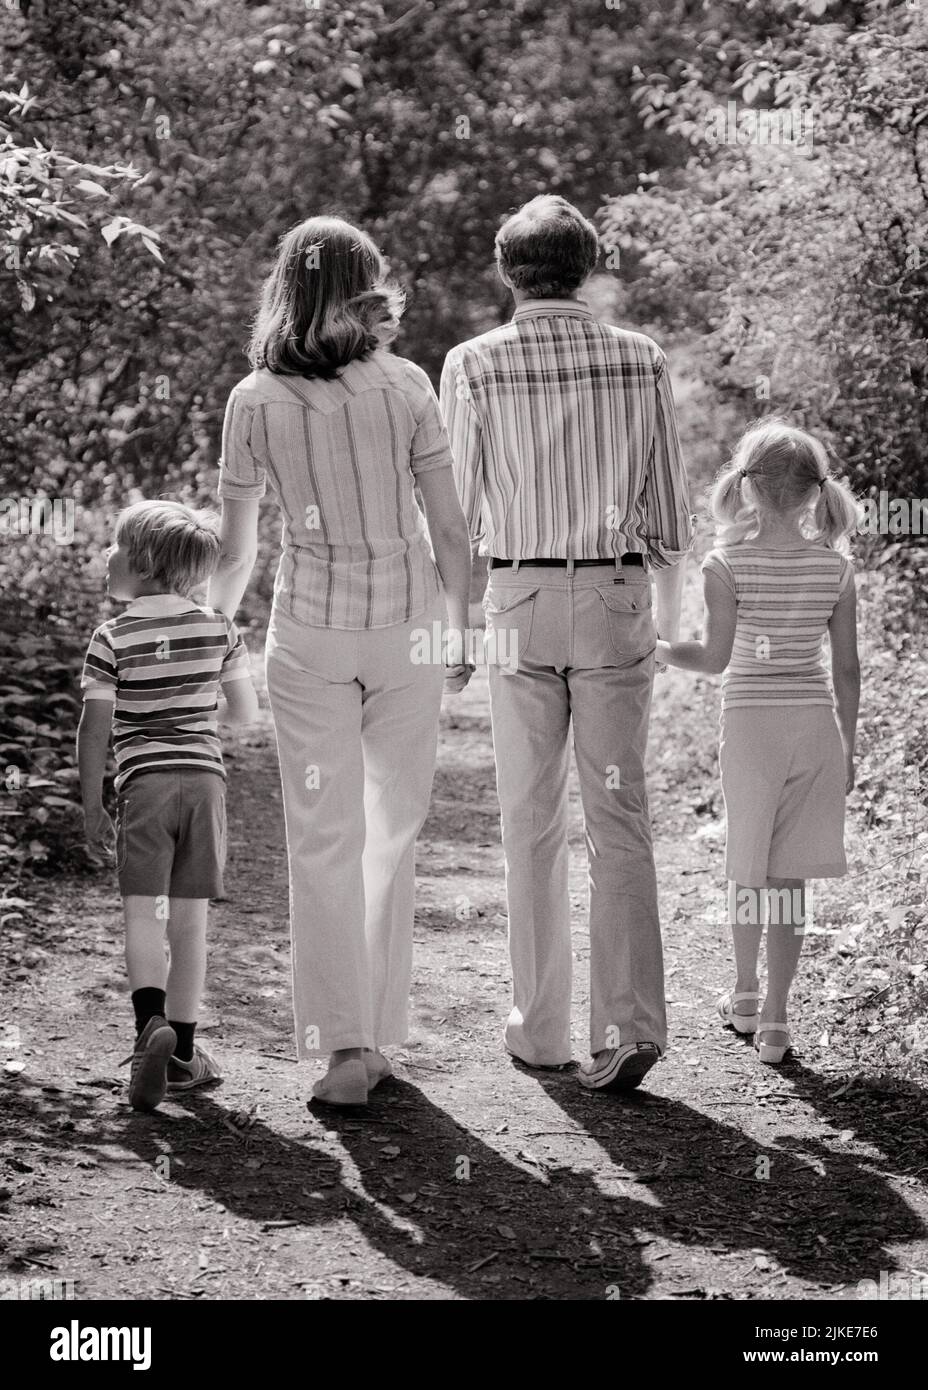 1970s FAMILY OF FOUR FROM BEHIND CASTING A SHADOW WALKING DOWN WOODED PATH HOLDING HANDS - j14169 HAR001 HARS DOWN HUSBAND DAD FOUR EXERCISING MOM SHADOW CLOTHING NOSTALGIC ACTIVE PAIR 4 MOTHERS OLD TIME NOSTALGIA OLD FASHION SISTER 1 FITNESS JUVENILE STYLE HEALTHY VACATION SONS FAMILIES JOY LIFESTYLE CELEBRATION FEMALES MARRIED RURAL SPOUSE HUSBANDS NATURE COPY SPACE FULL-LENGTH LADIES DAUGHTERS PERSONS CARING MALES SERENITY SISTERS FATHERS B&W PARTNER SUMMERTIME TIME OFF ACTIVITY PATH HAPPINESS PHYSICAL ADVENTURE STRENGTH TRIP GETAWAY DADS RECREATION HOLDING HANDS REAR VIEW HOLIDAYS Stock Photo